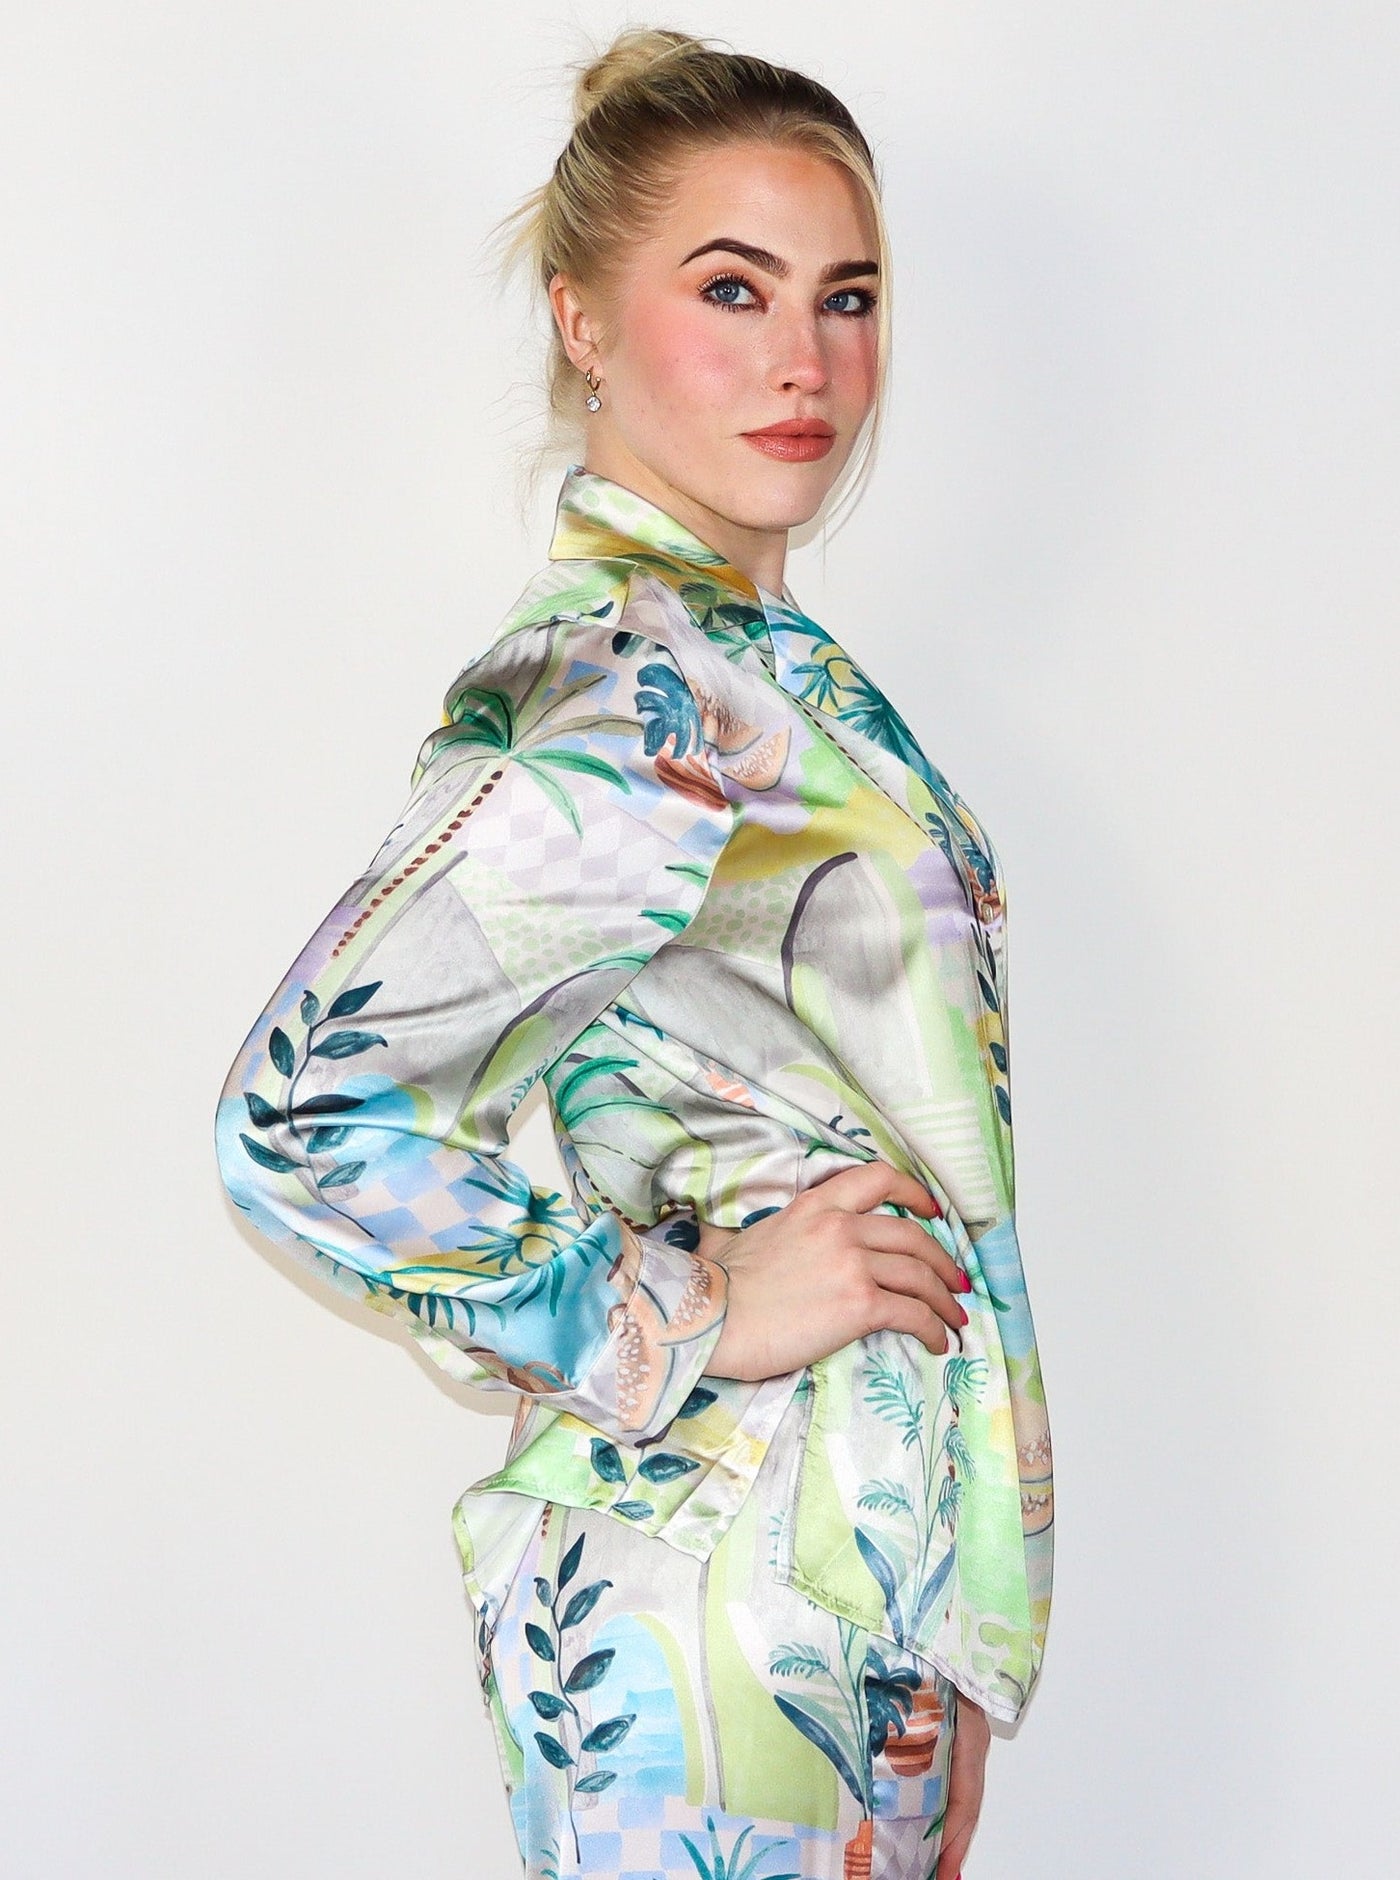 Model is wearing a silky button up collared blouse with a beachy/summery print. Top is paired with matching bottoms.